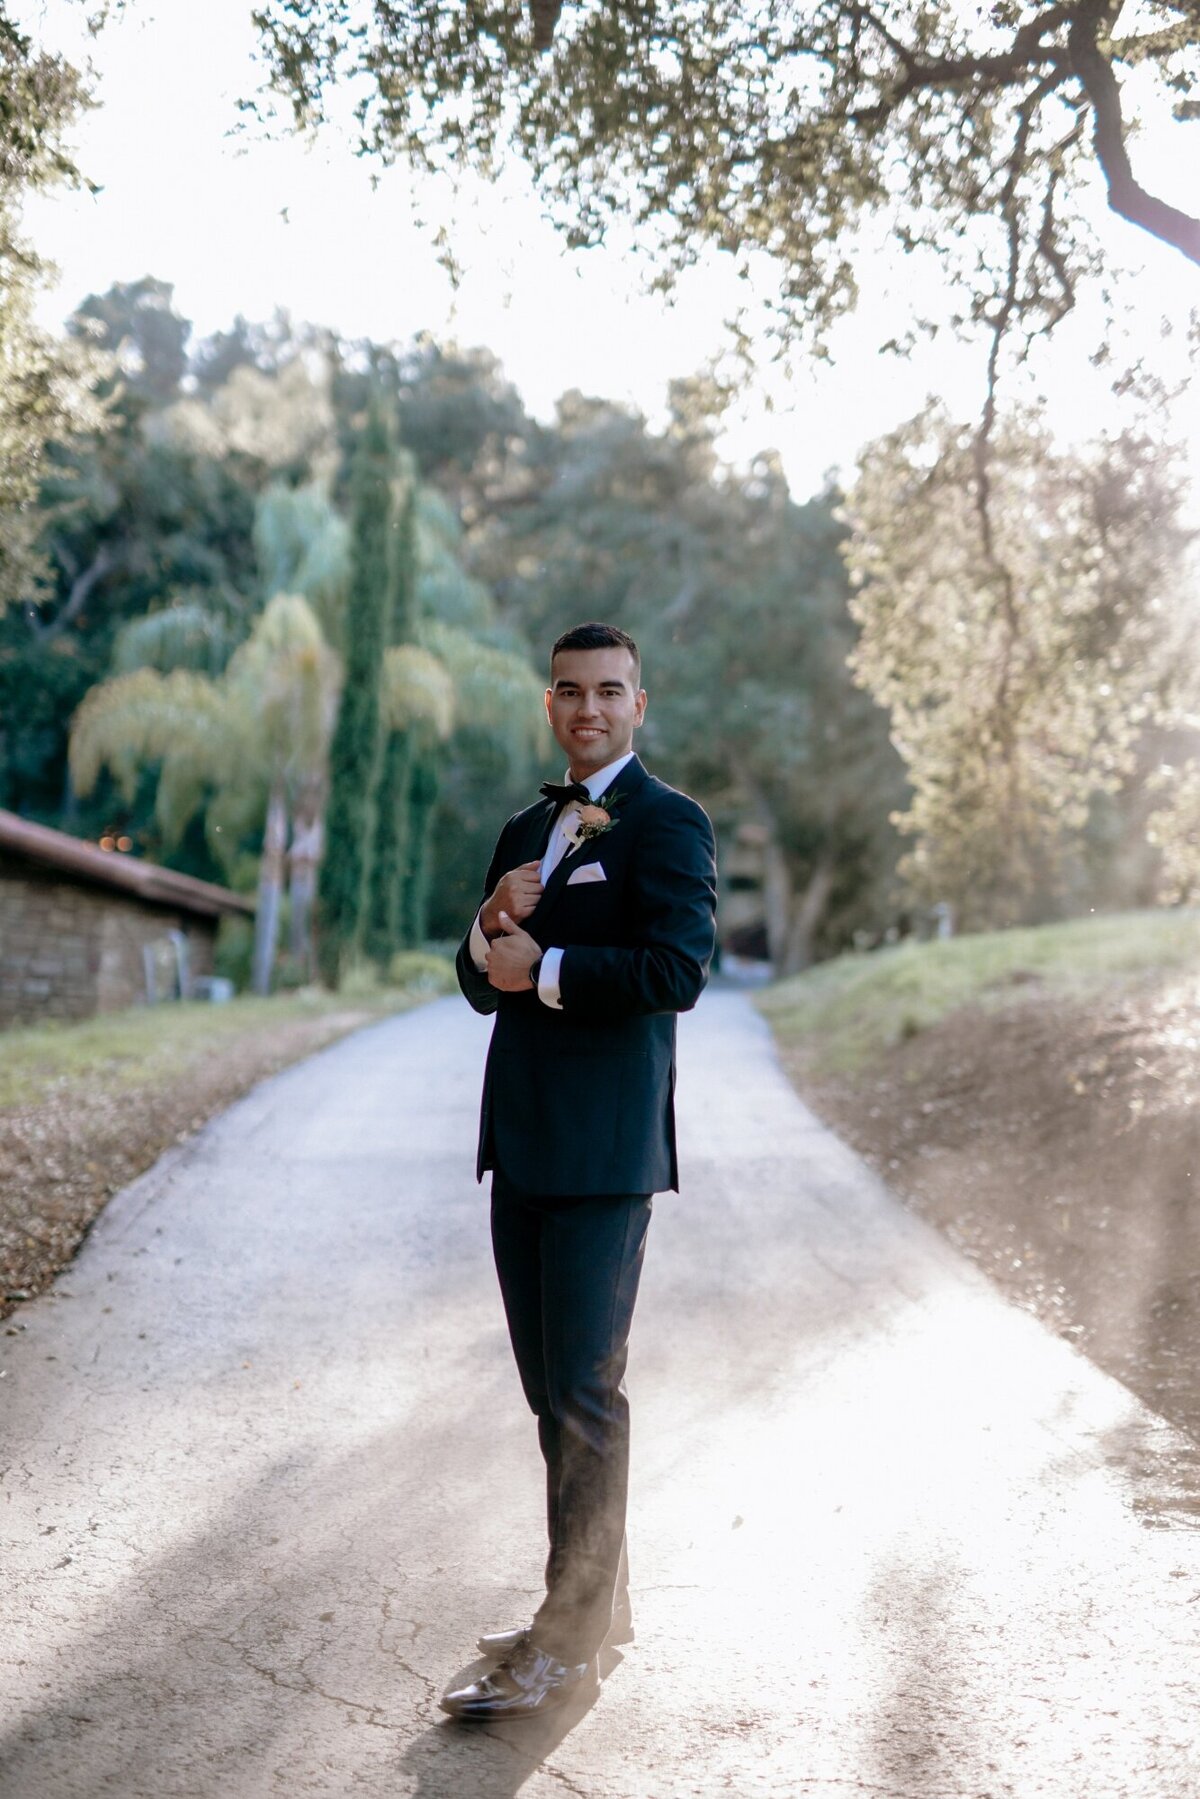 Groom posing on the road at the winery in Temecula with his hand on his cufflinks.